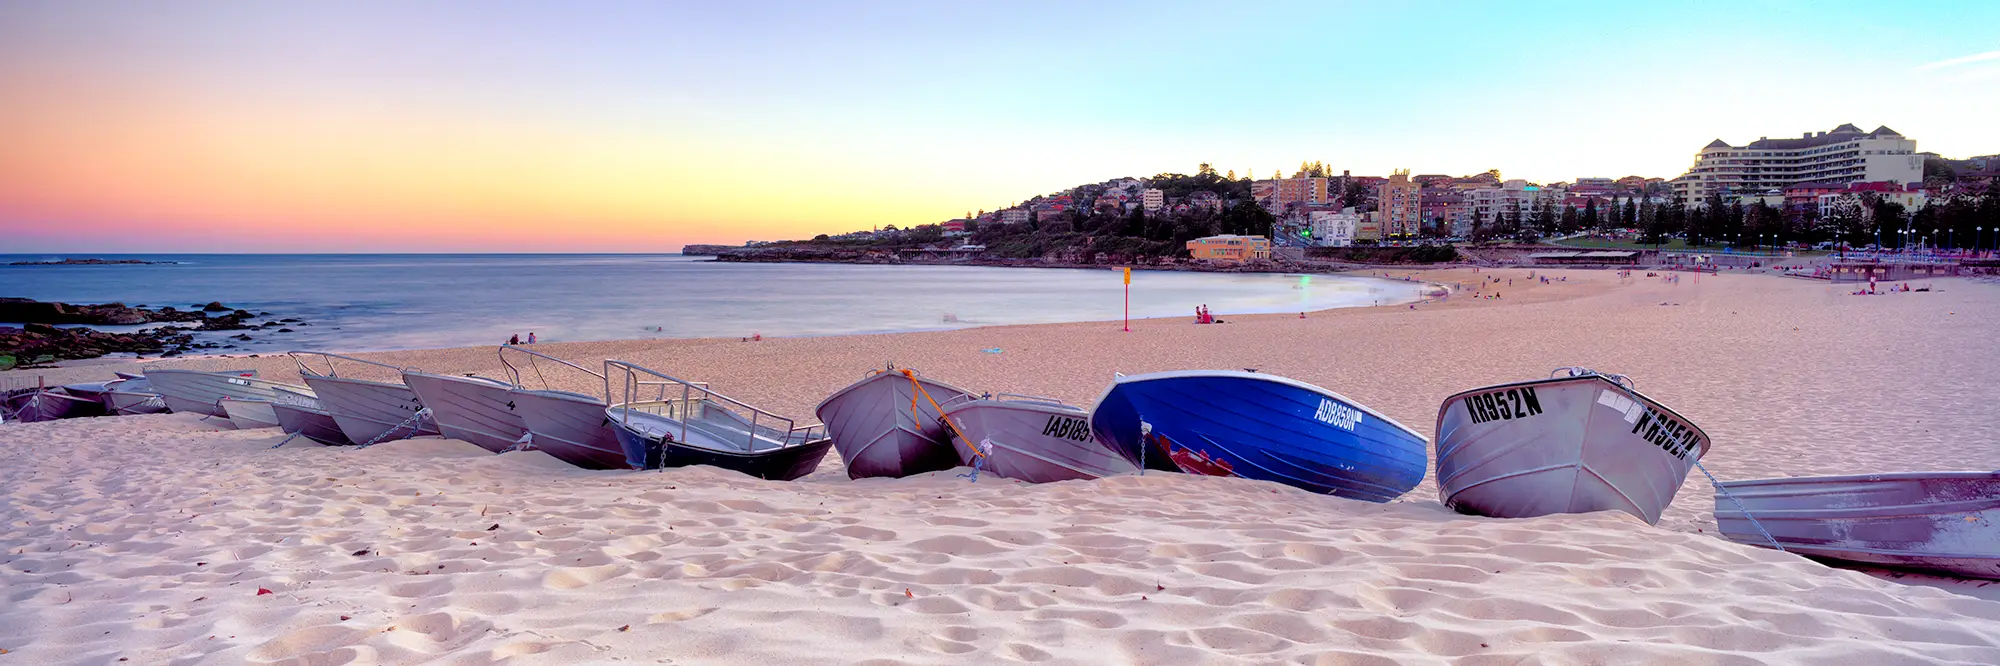 Coogee Beach Boats Wide Angle Panoramic Landscape Stretched Canvas Prints